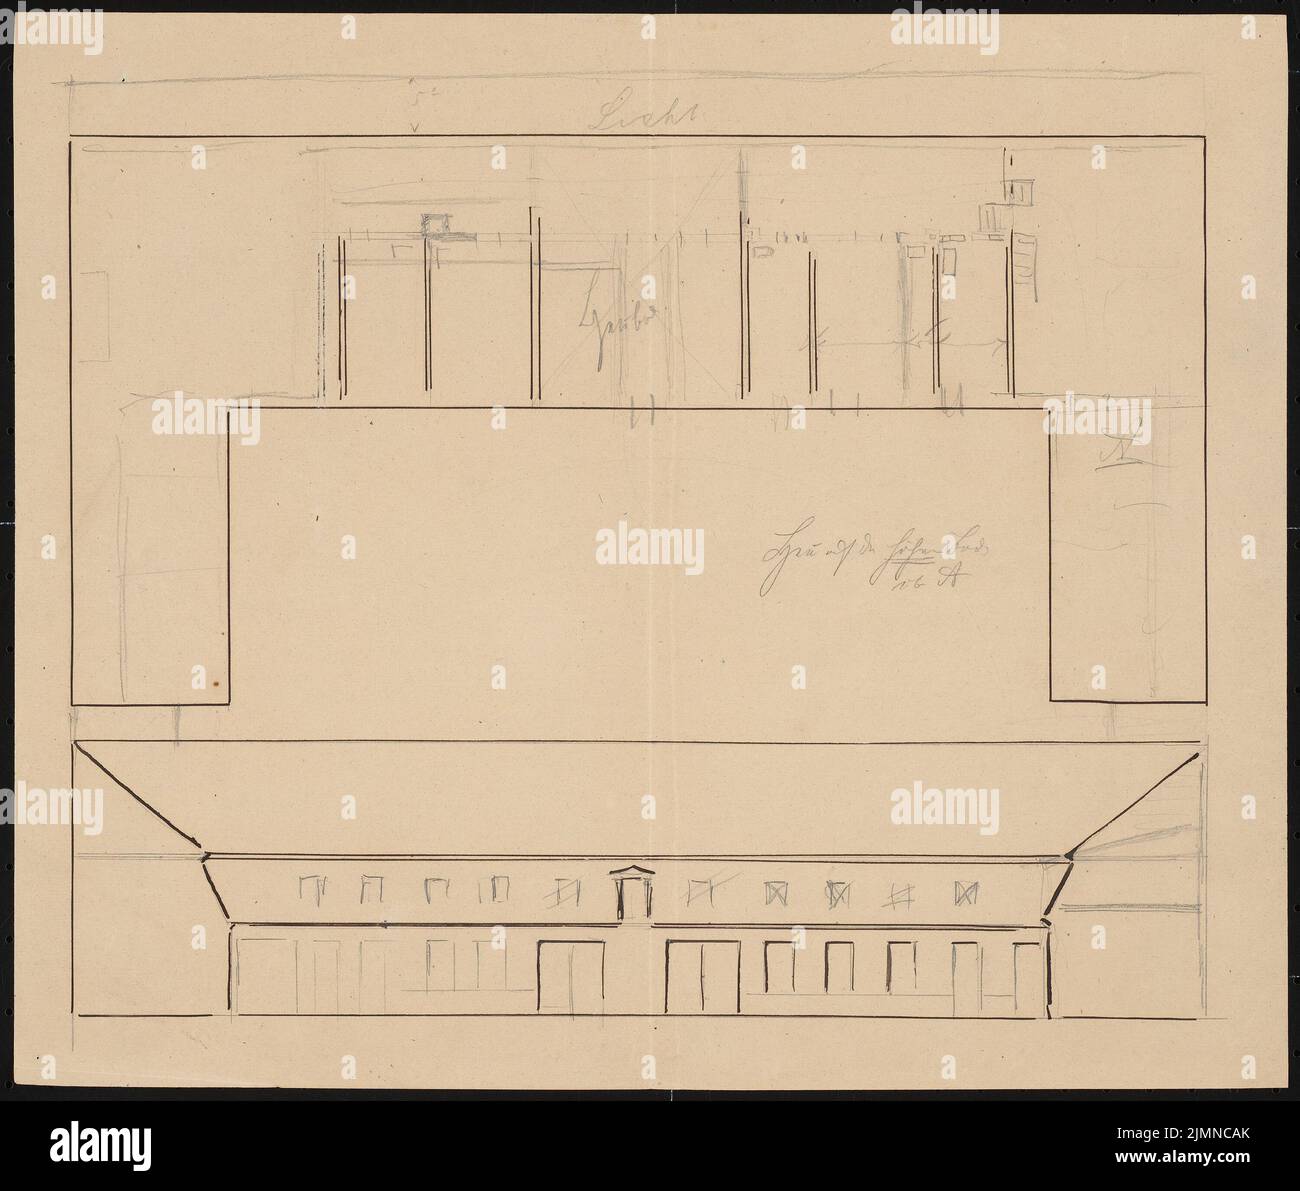 Knoblauch Gustav (1833-1916), Russian embassy, Berlin (1874): floor plan and tearing of the rear economic and stable buildings. Ink and pencil on paper, 36.5 x 43.1 cm (including scan edges) Stock Photo